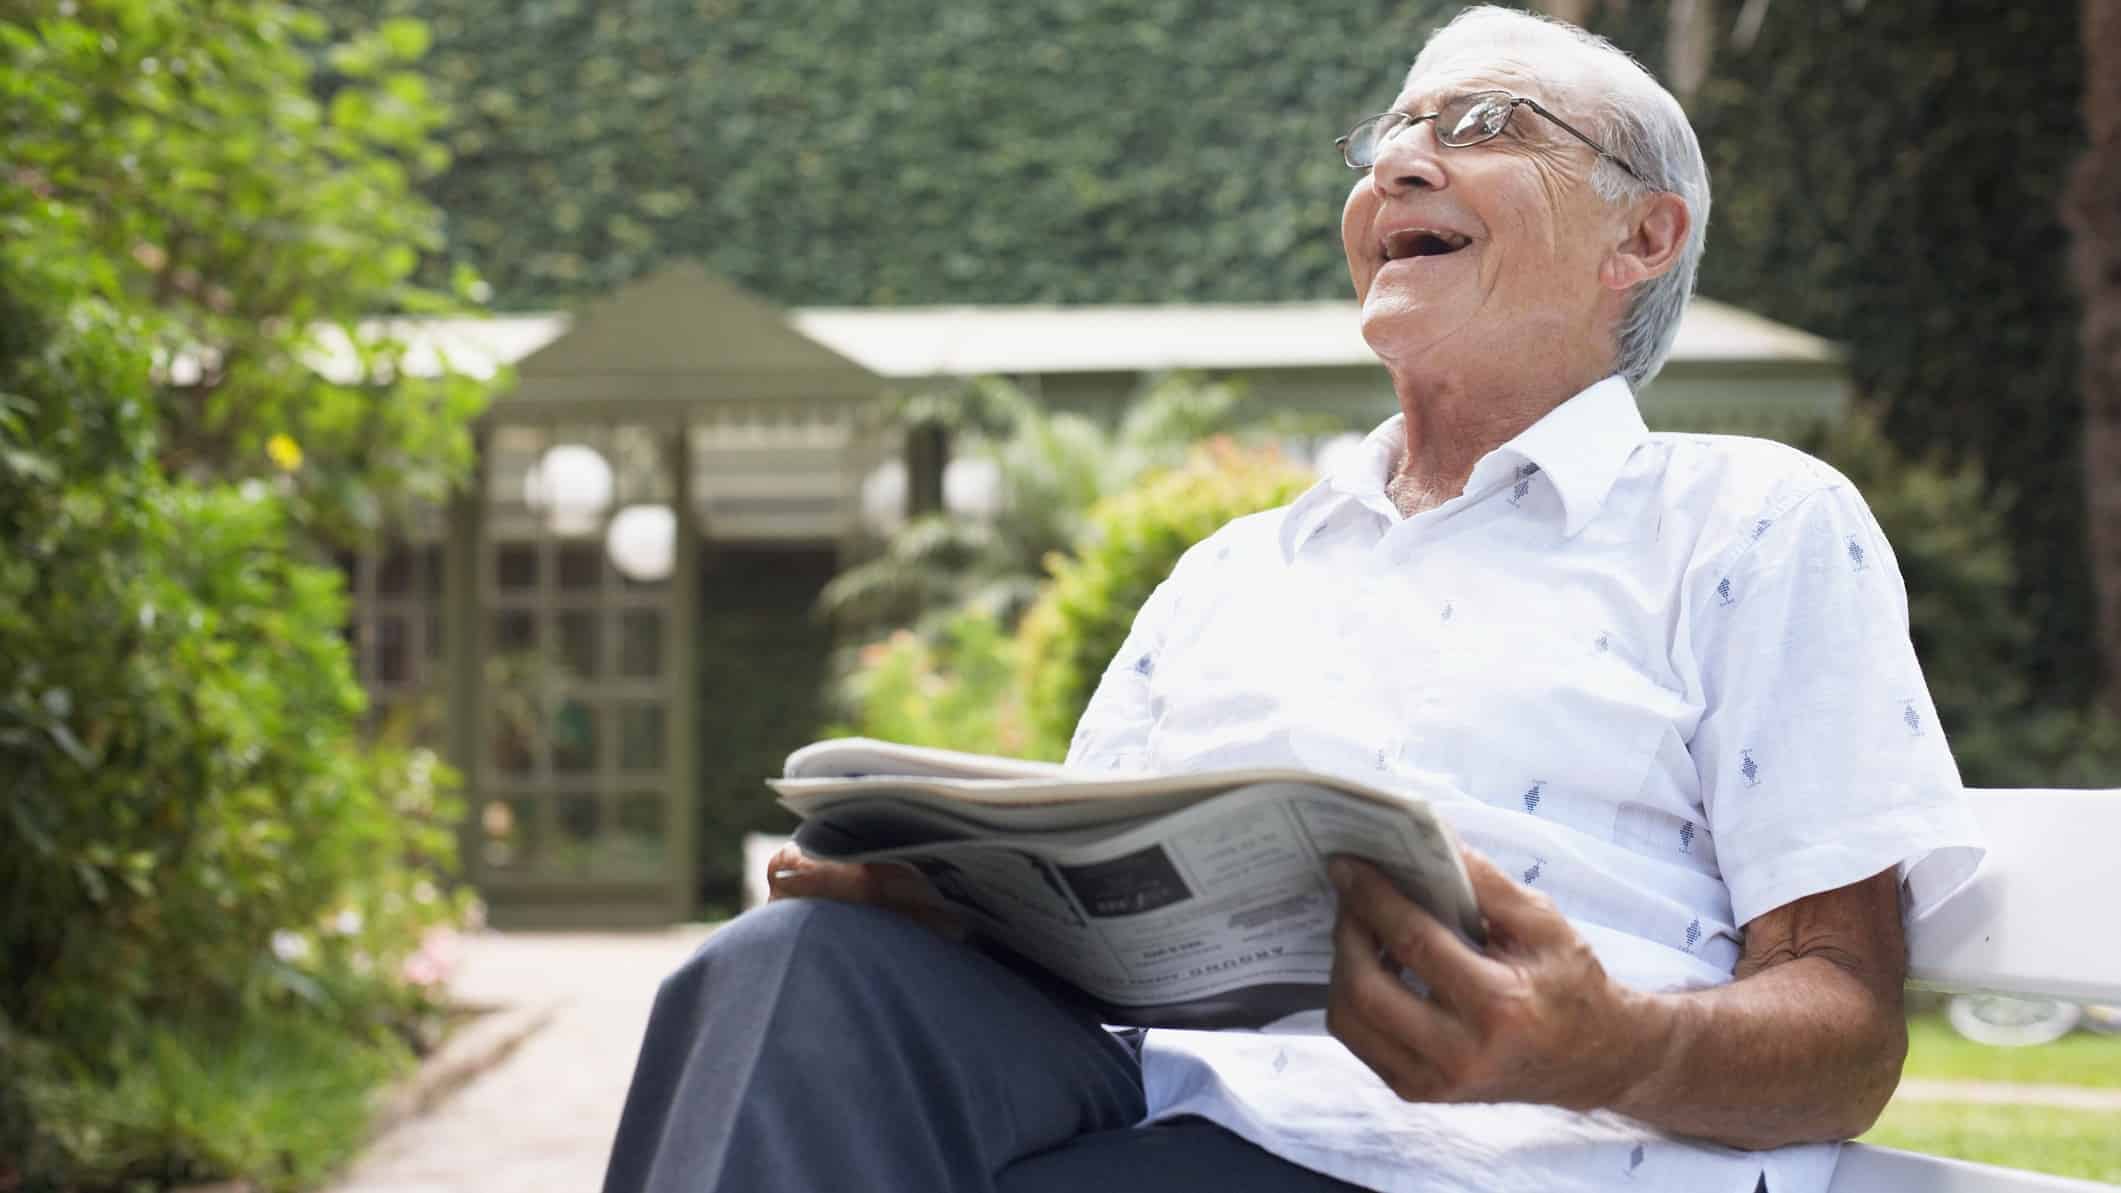 a happy investor, in this case an older gentleman, throws his head back and laughs while reading the newspaper in his garden.